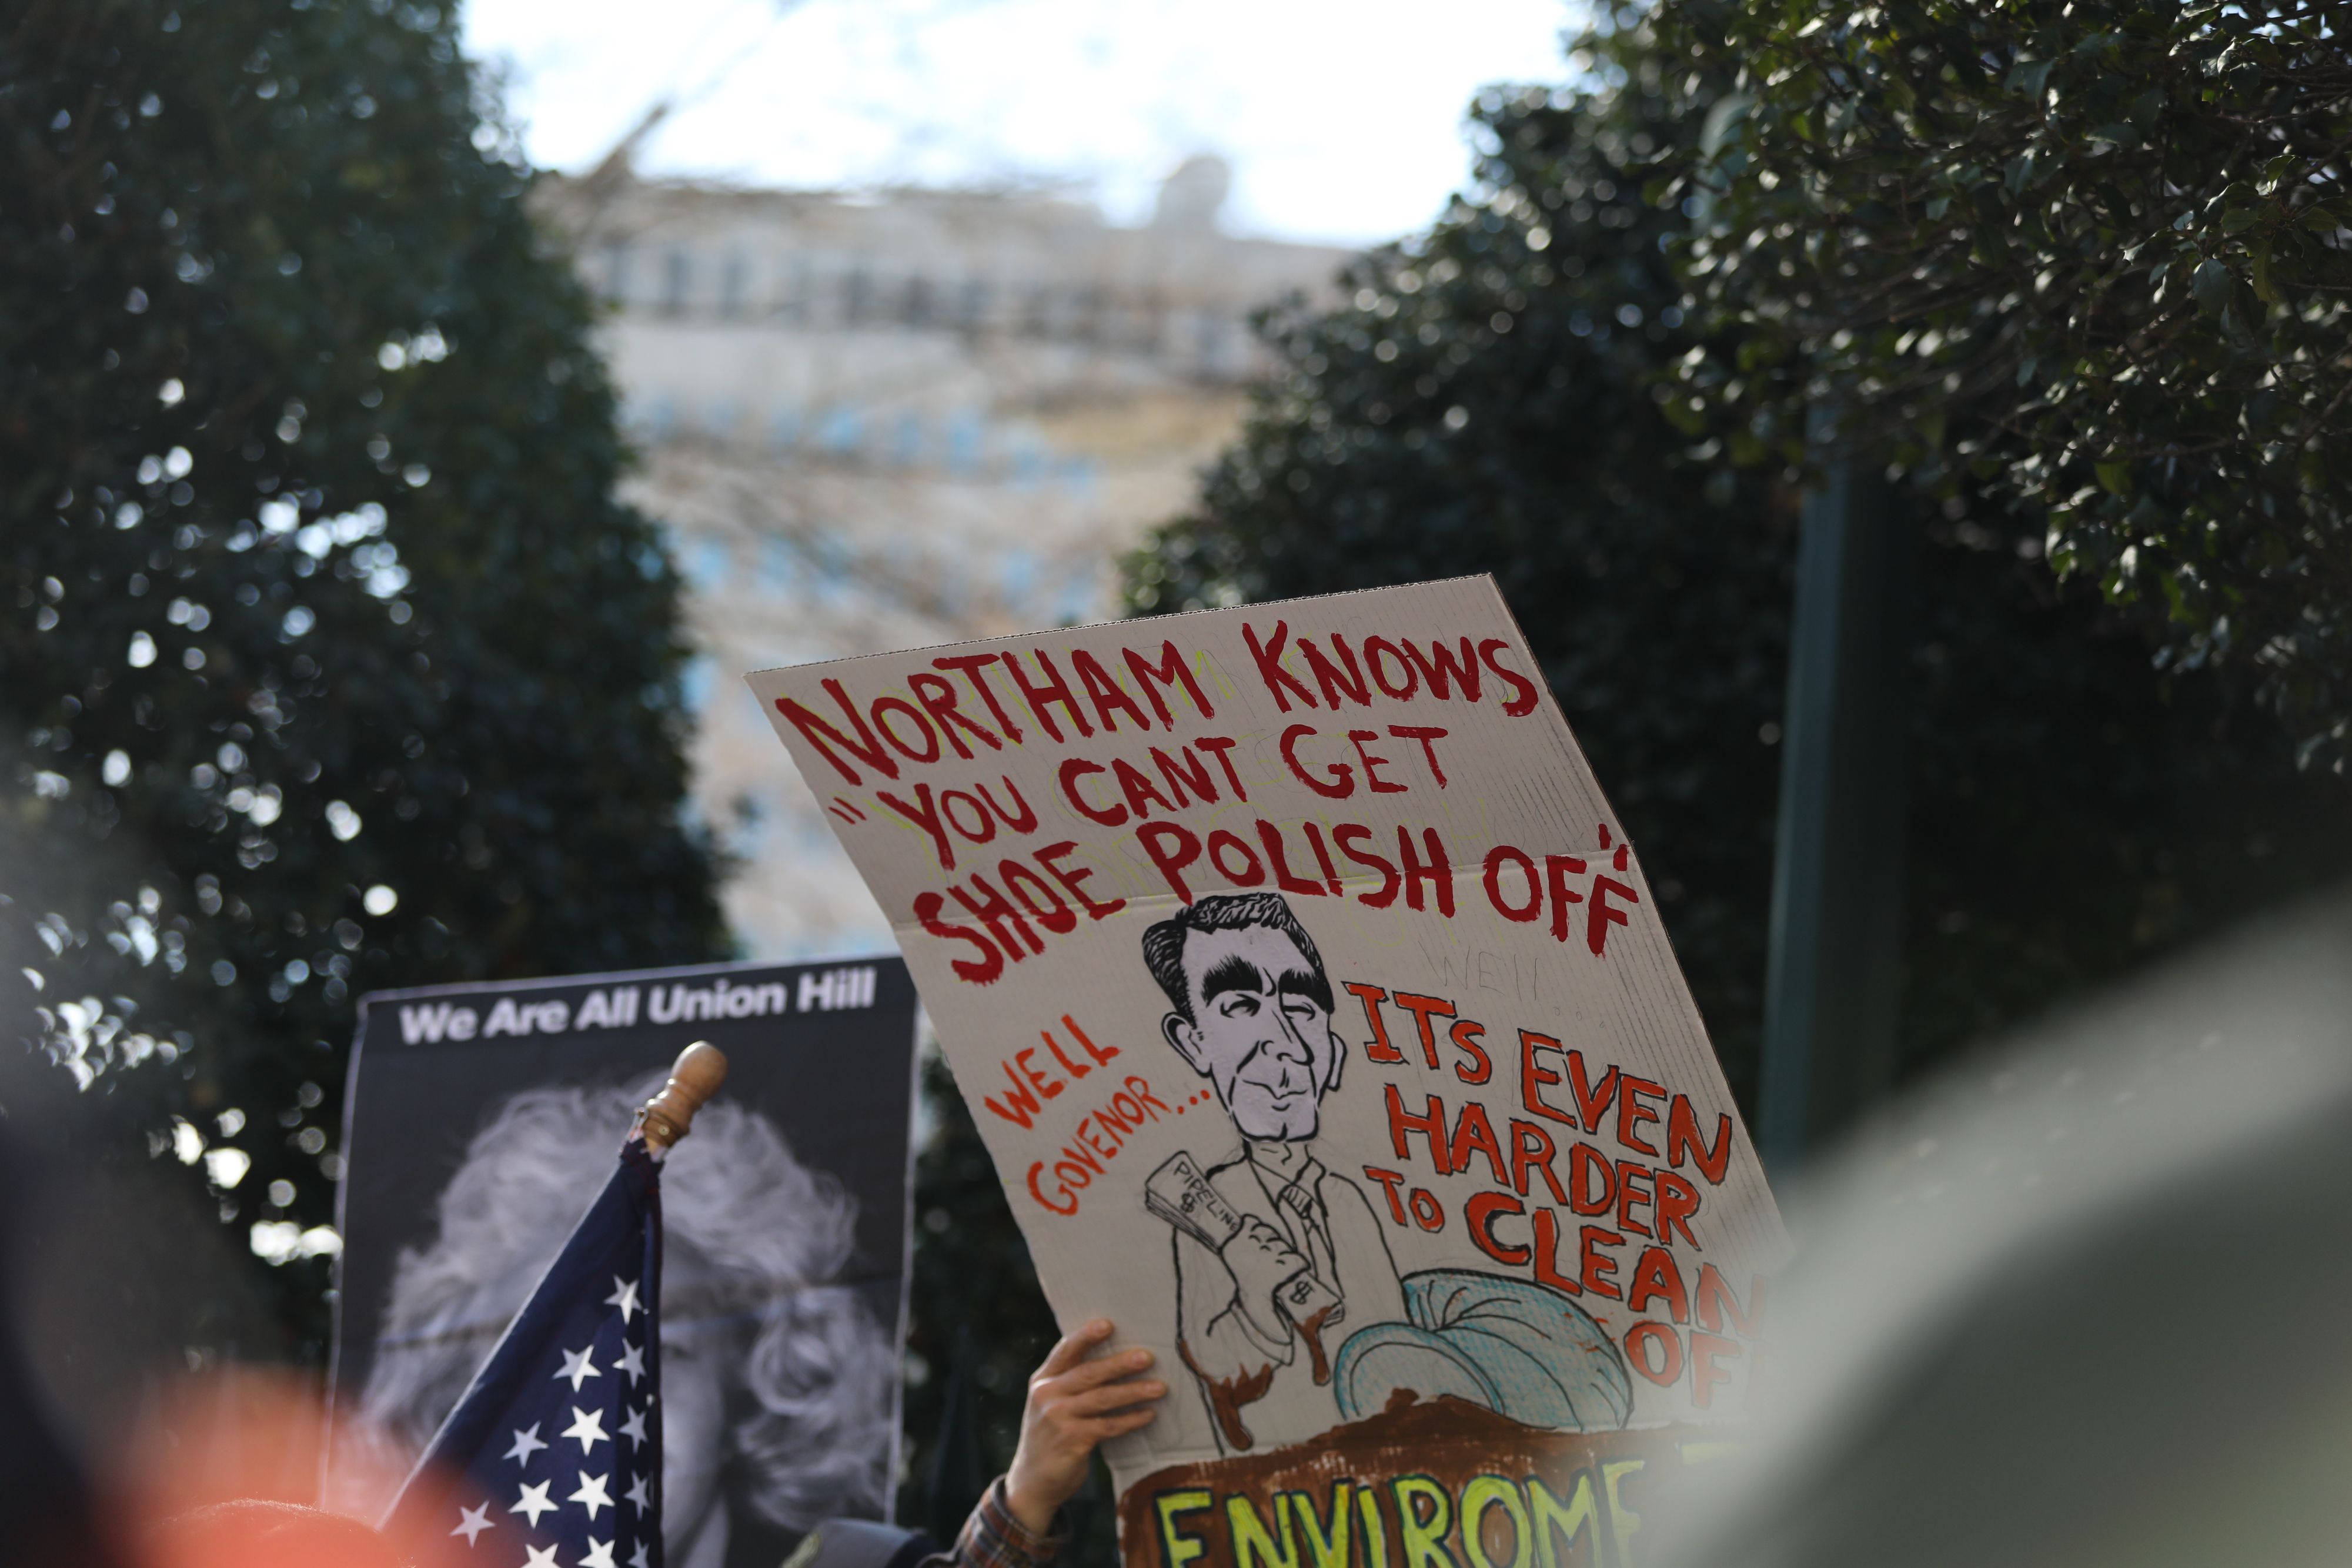 Protestors rally against Virginia Governor Ralph Northam outside of the governors mansion in downtown Richmond, Virginia on February 4, 2019. (LOGAN CYRUS/AFP via Getty Images)